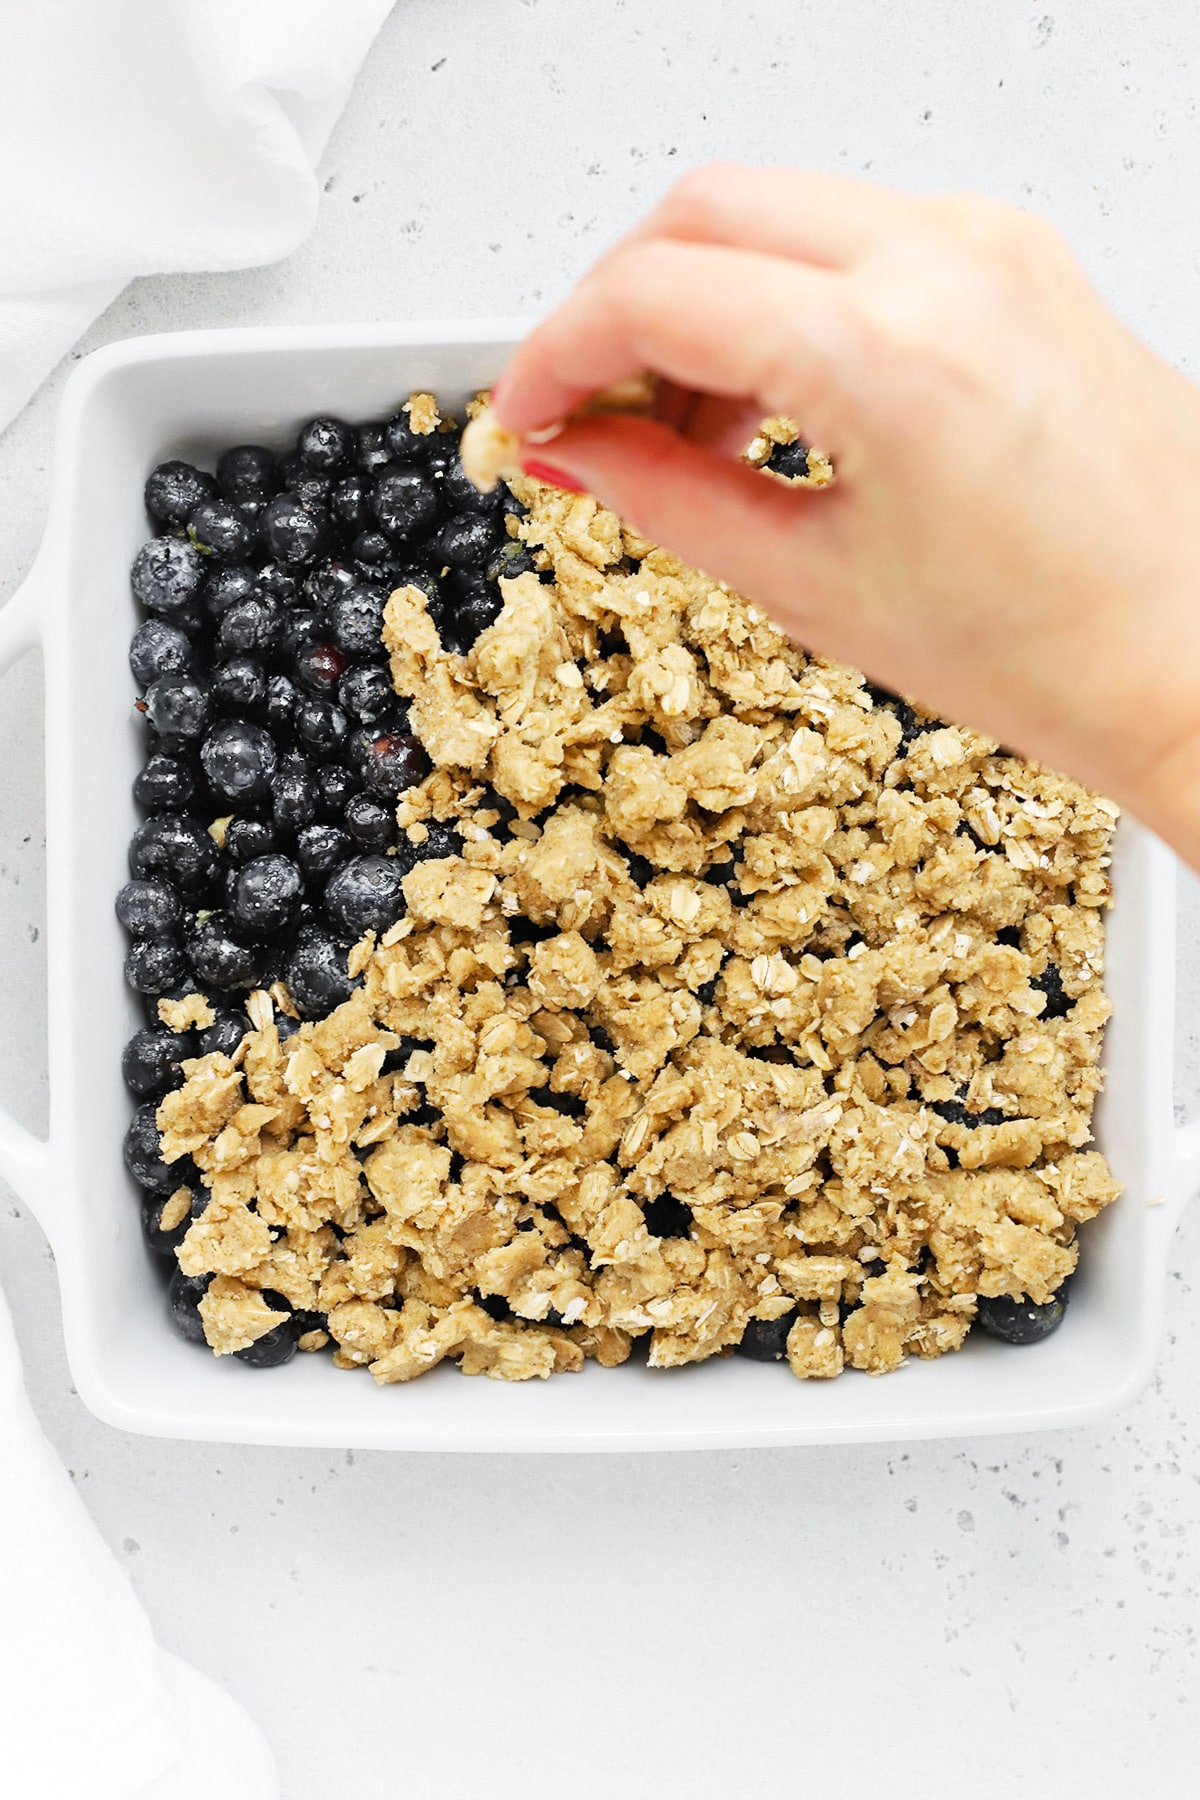 Adding crumble topping to gluten-free blueberry crisp